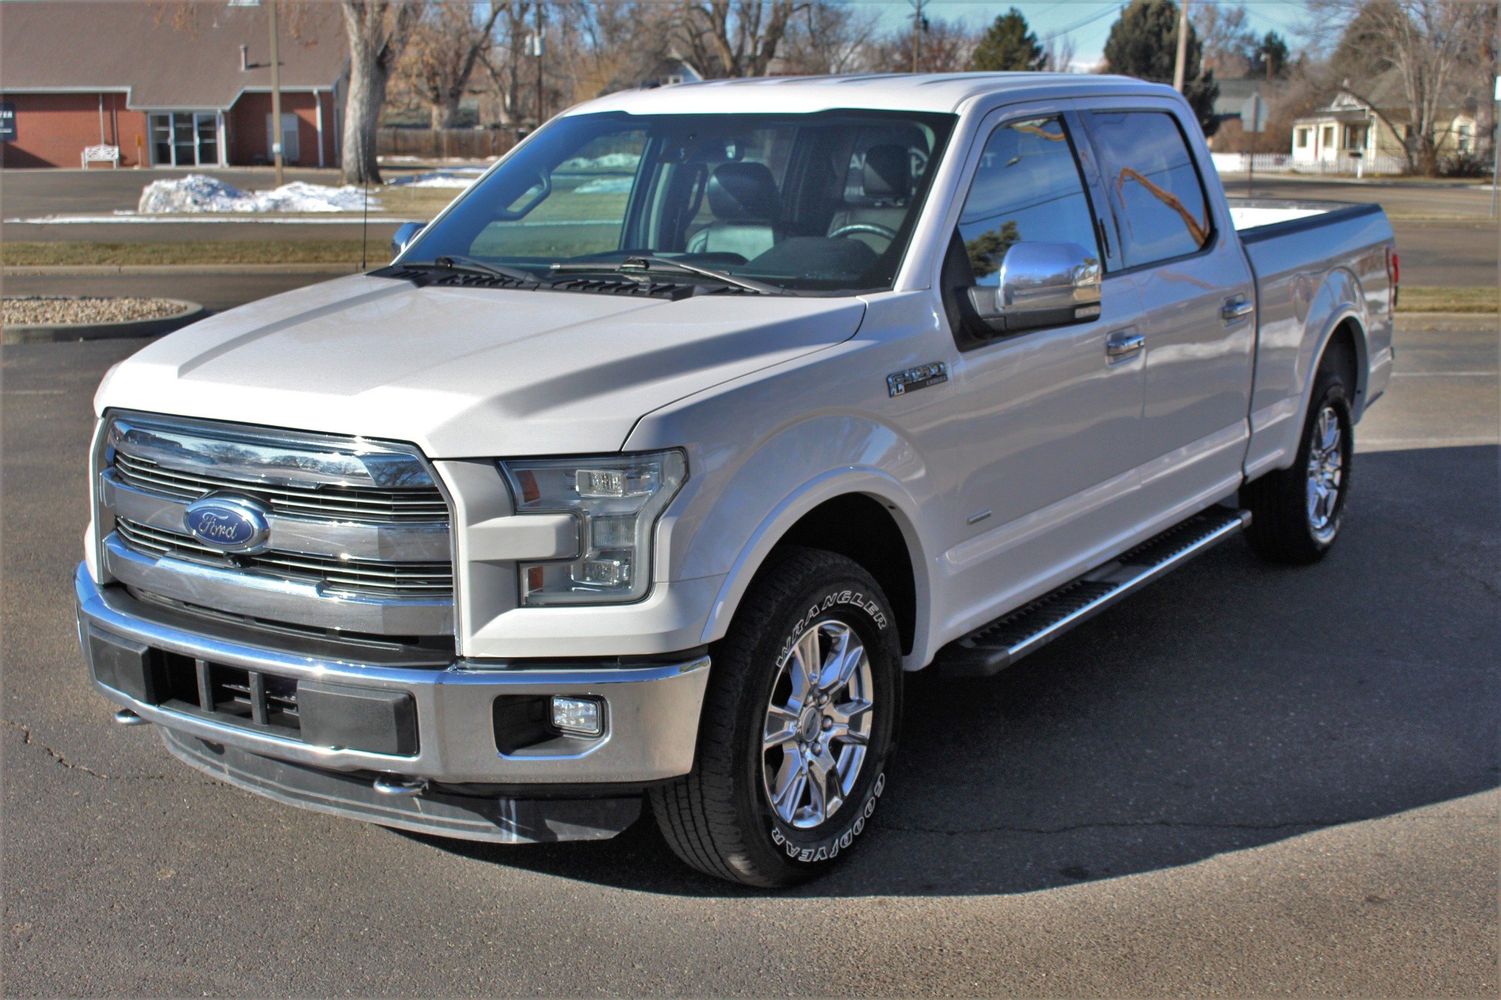 2015 Ford F 150 Lariat 5.0 Towing Capacity